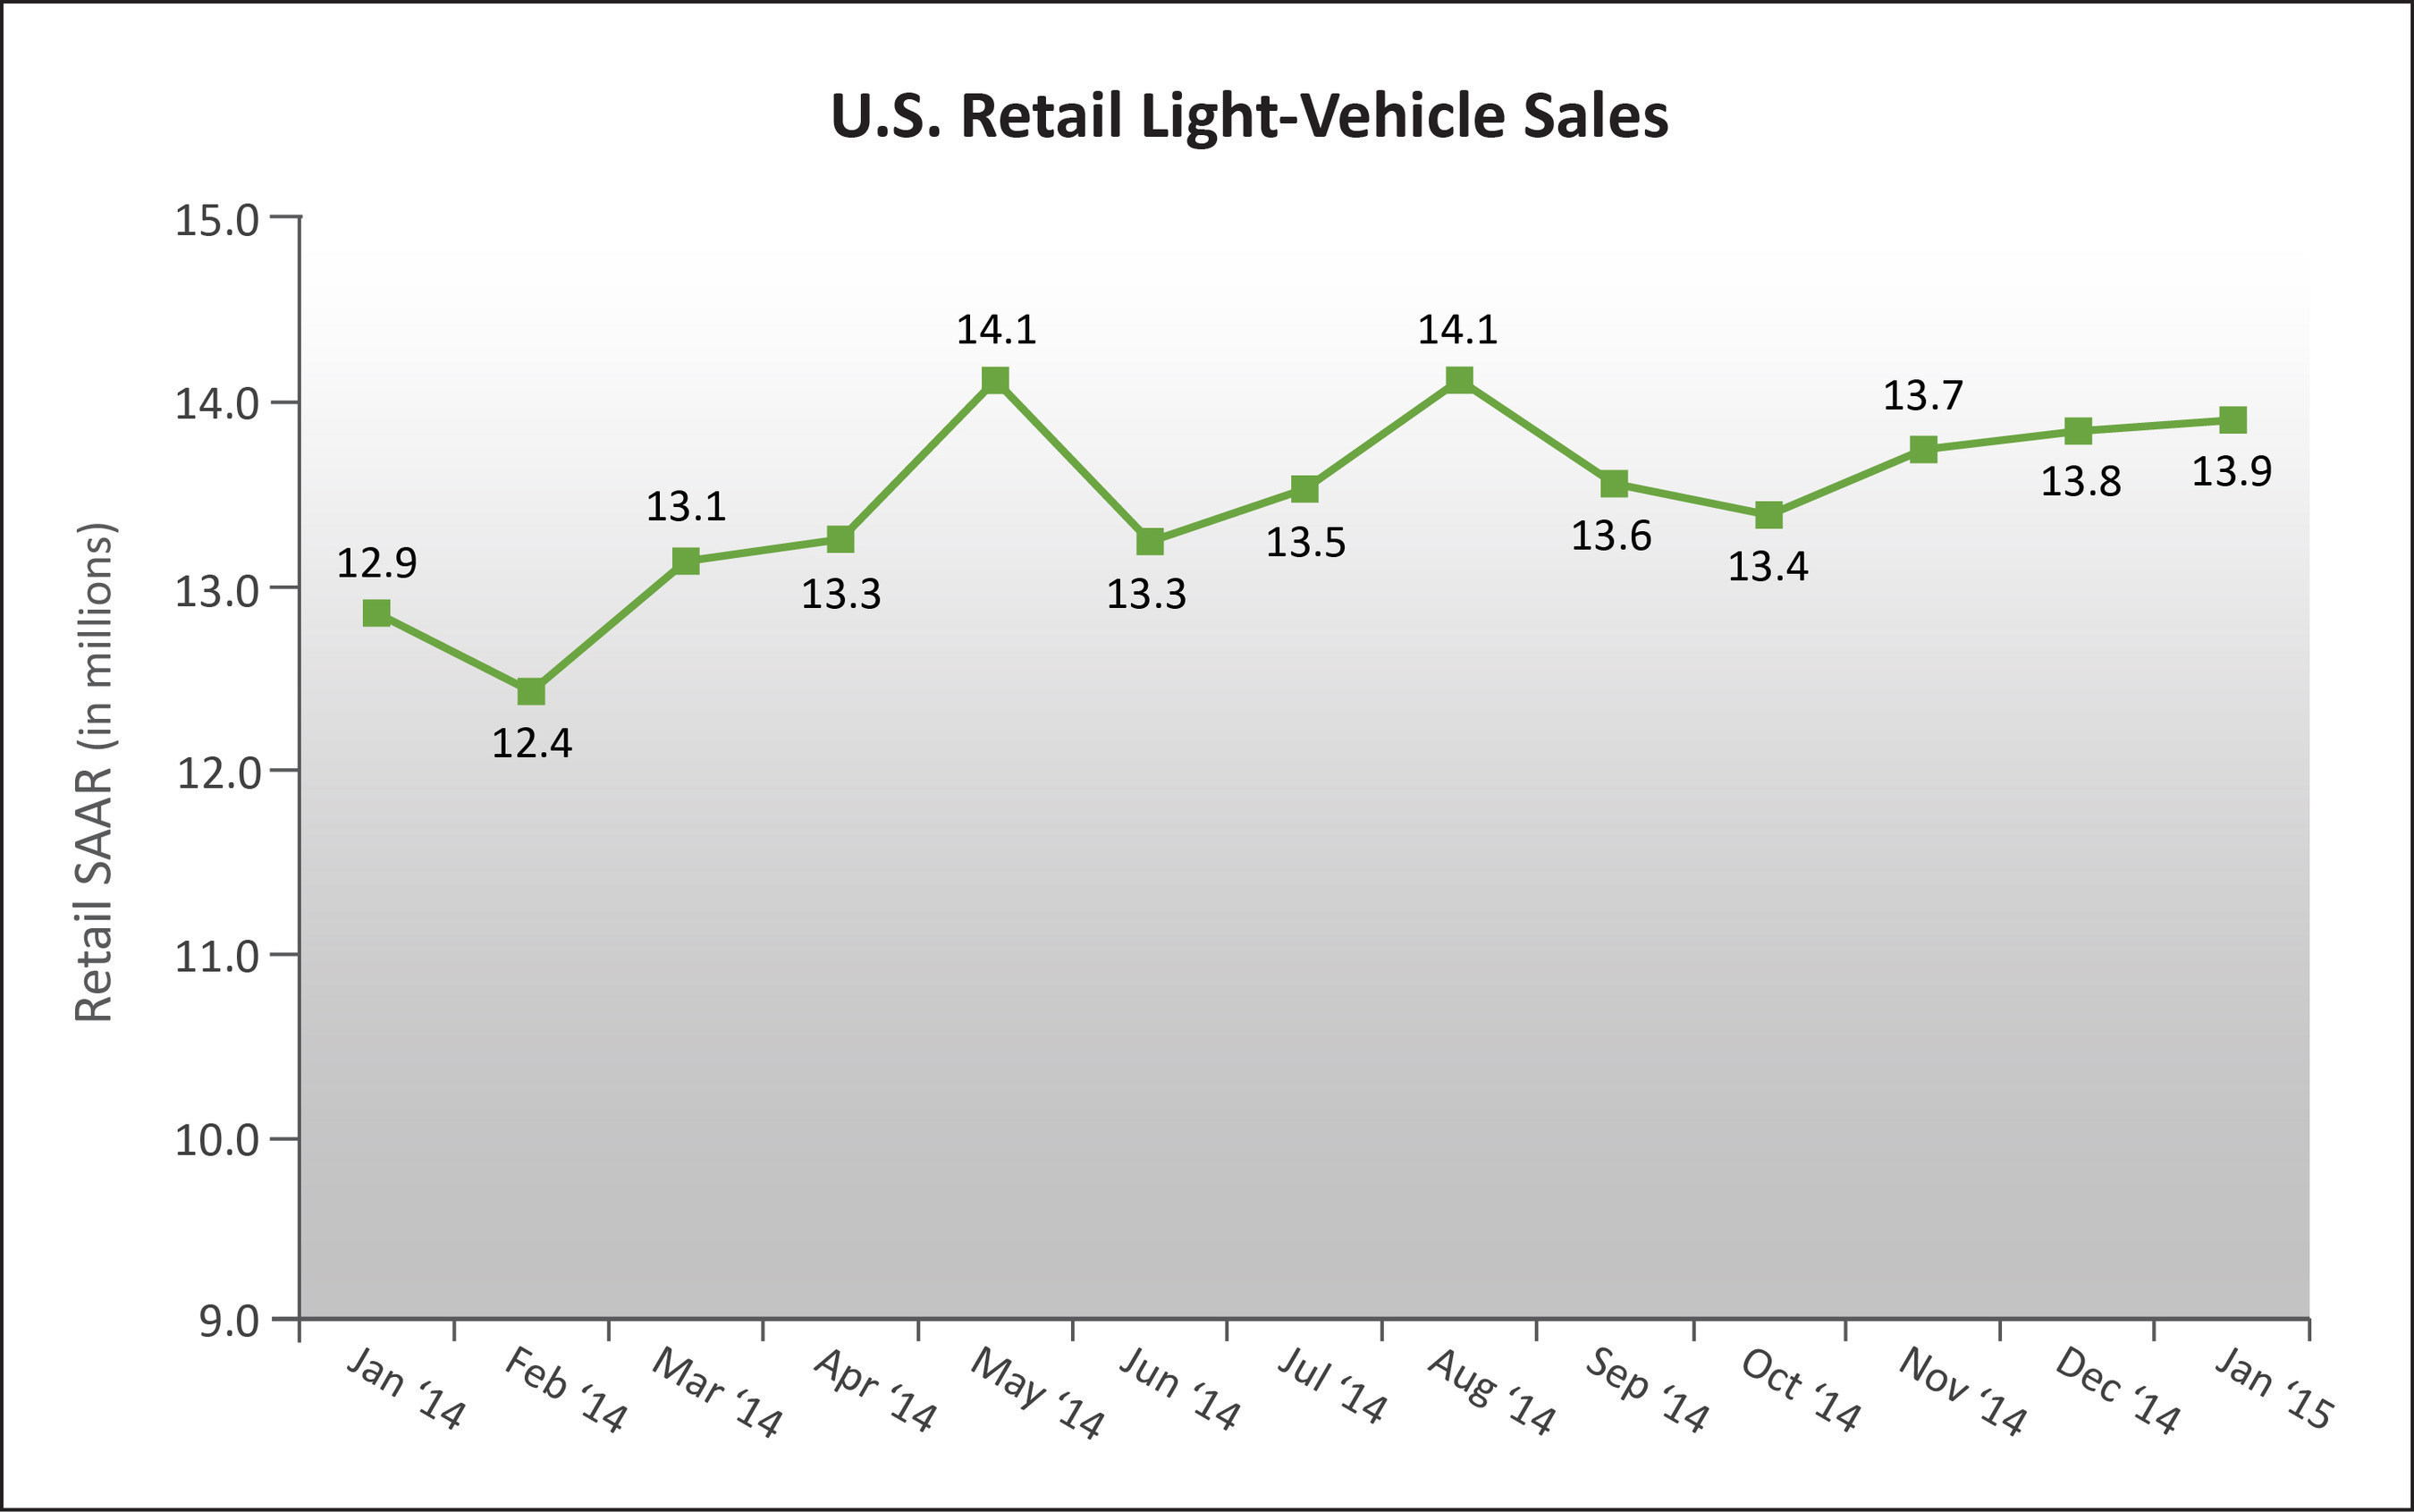 U.S. Retail SAAR-January 2014 to January 2015 (in millions of units) Source: Power Information Network (PIN) from J.D. Power